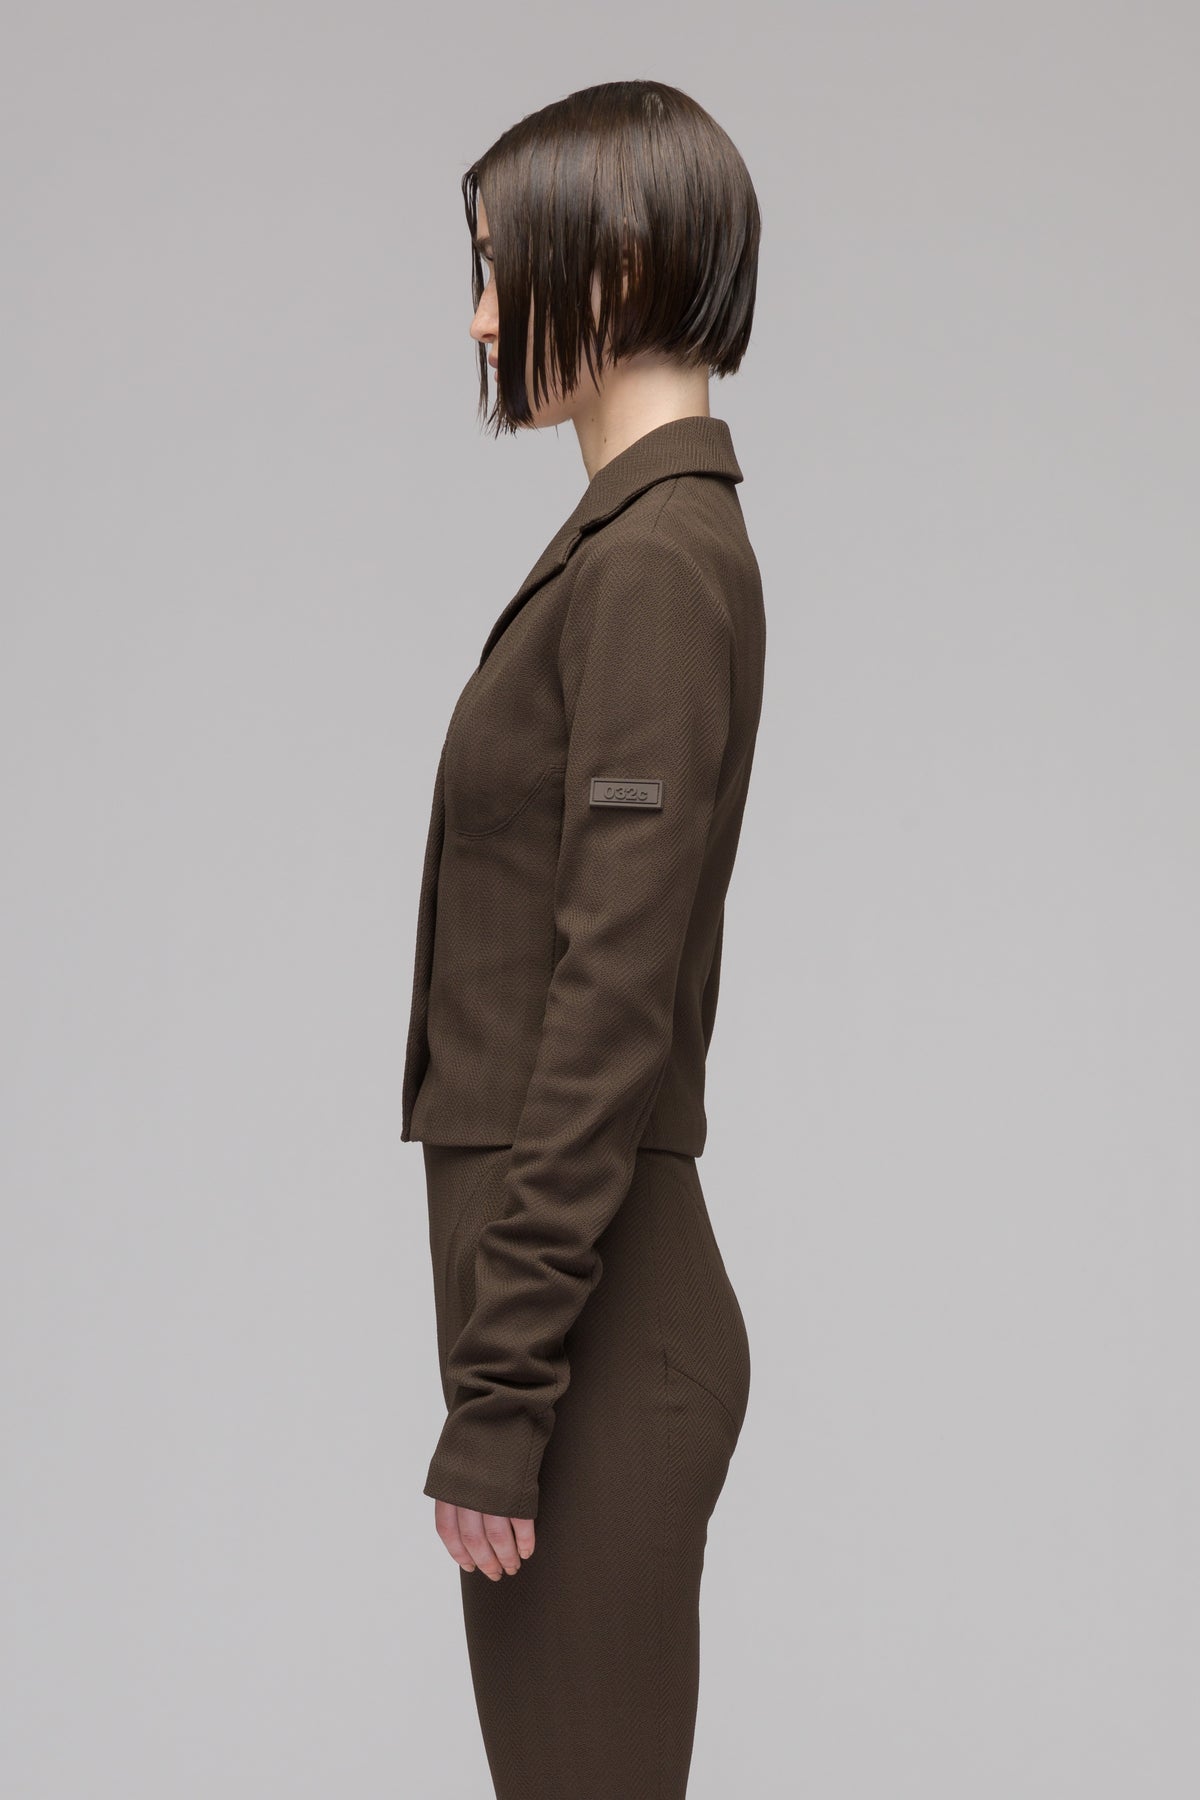 'TRAPEZE' TOO-TIGHT CROPPED SUIT JACKET